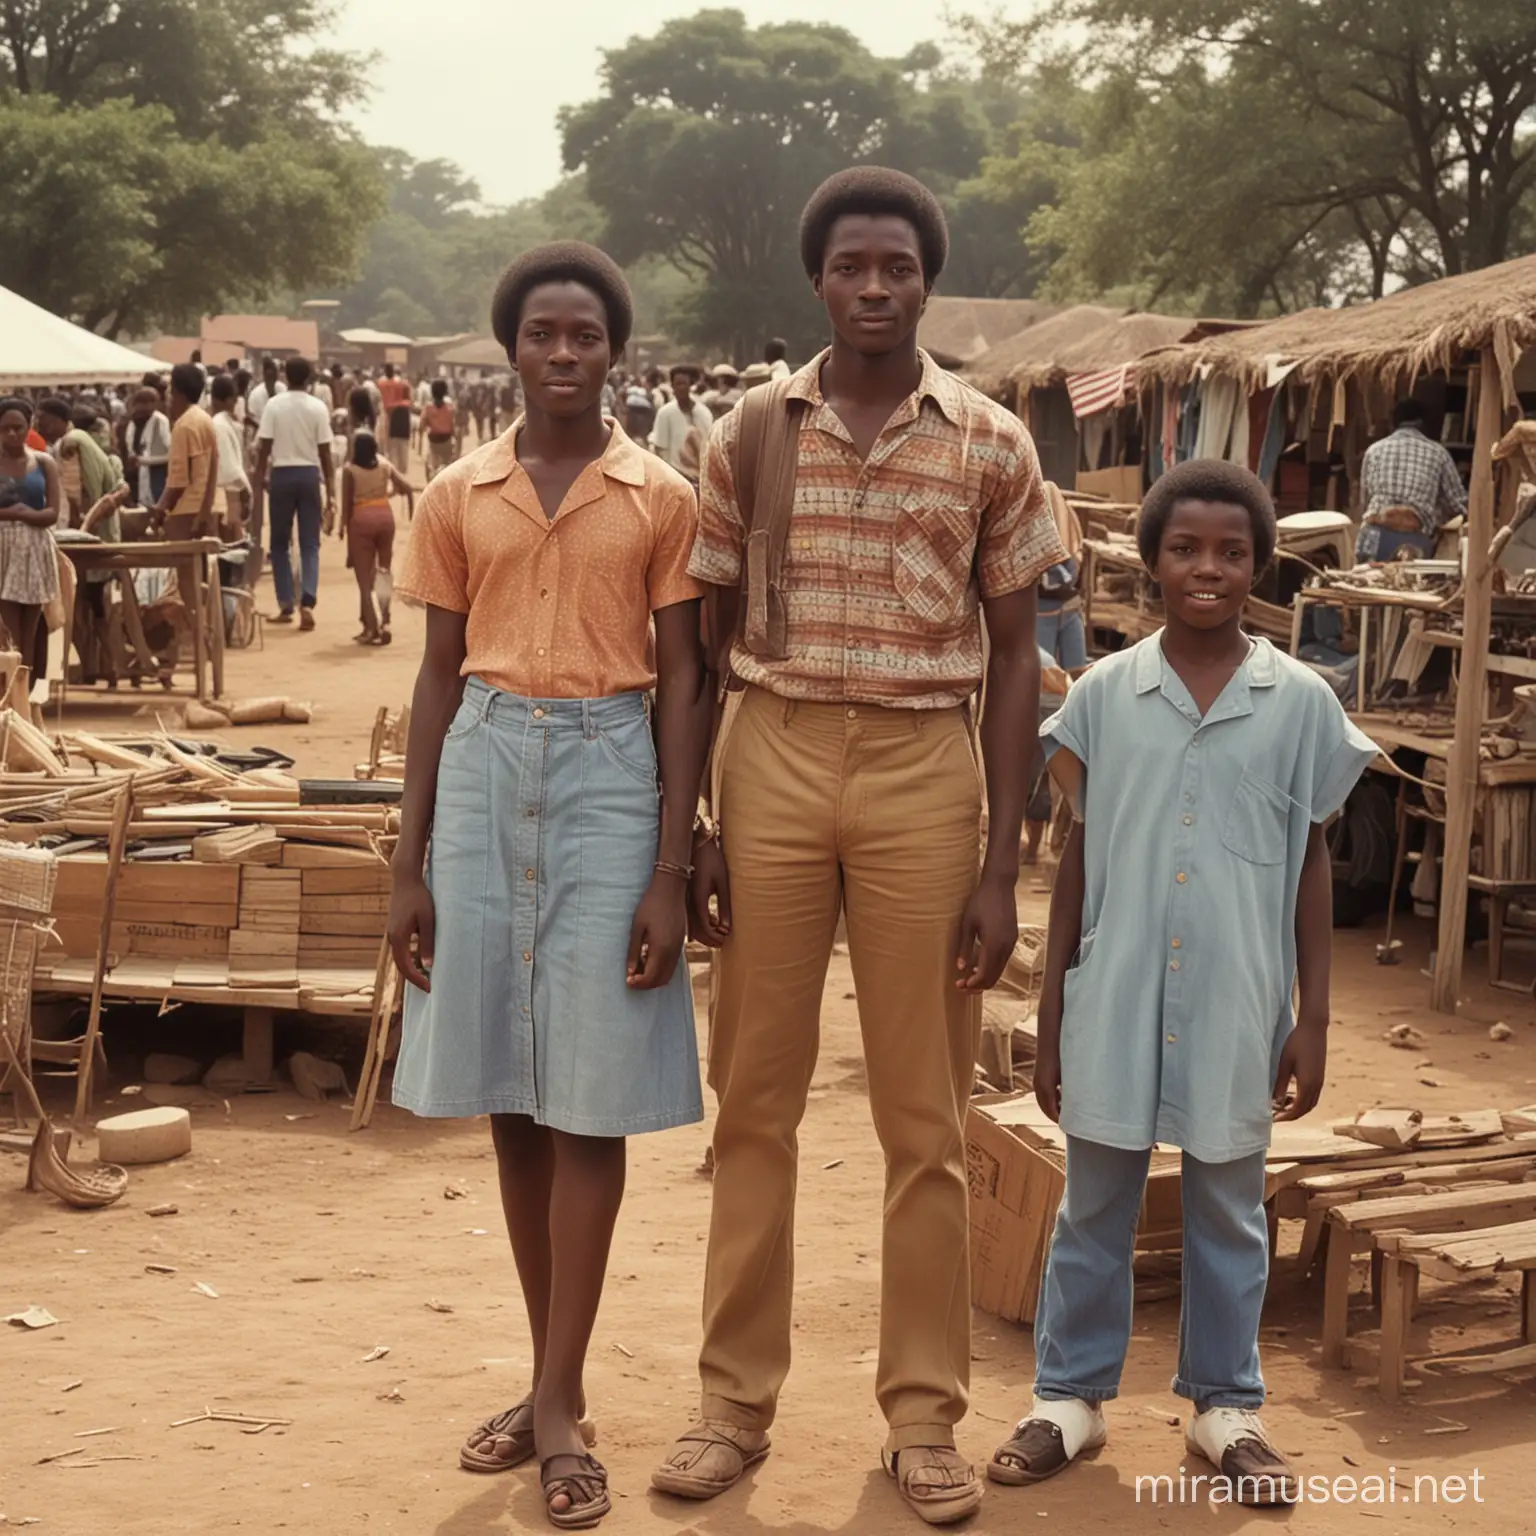 can you show an image of what it looks like as a college student 
to leave your african country to america in the 70s showing both worlds